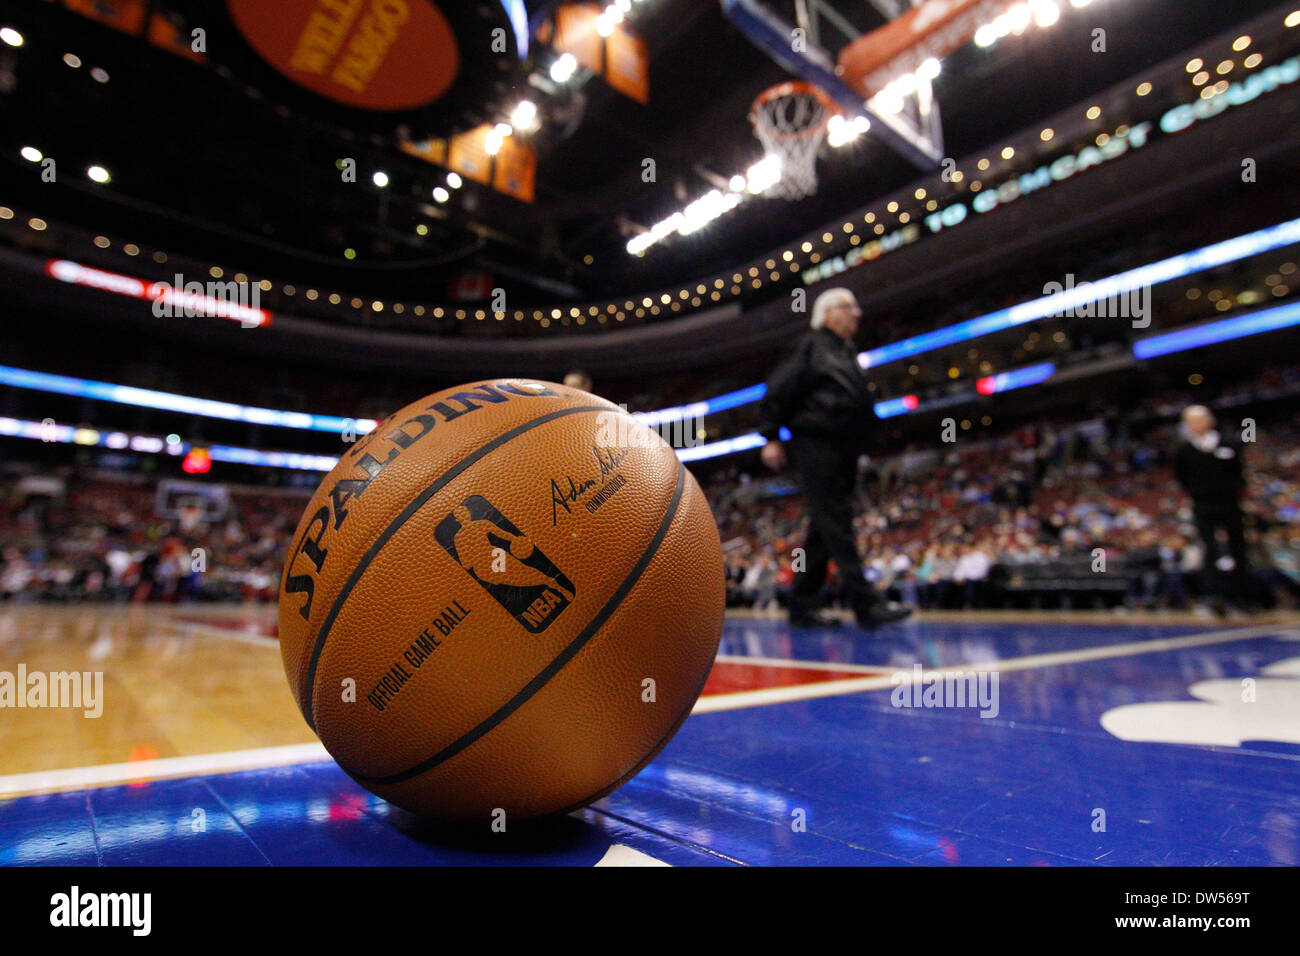 February 26, 2014: The basketball sits on the court during the NBA game between the Orlando Magic and the Philadelphia 76ers at the Wells Fargo Center in Philadelphia, Pennsylvania. The Magic won 101-90. Christopher Szagola/Cal Sport Media Stock Photo